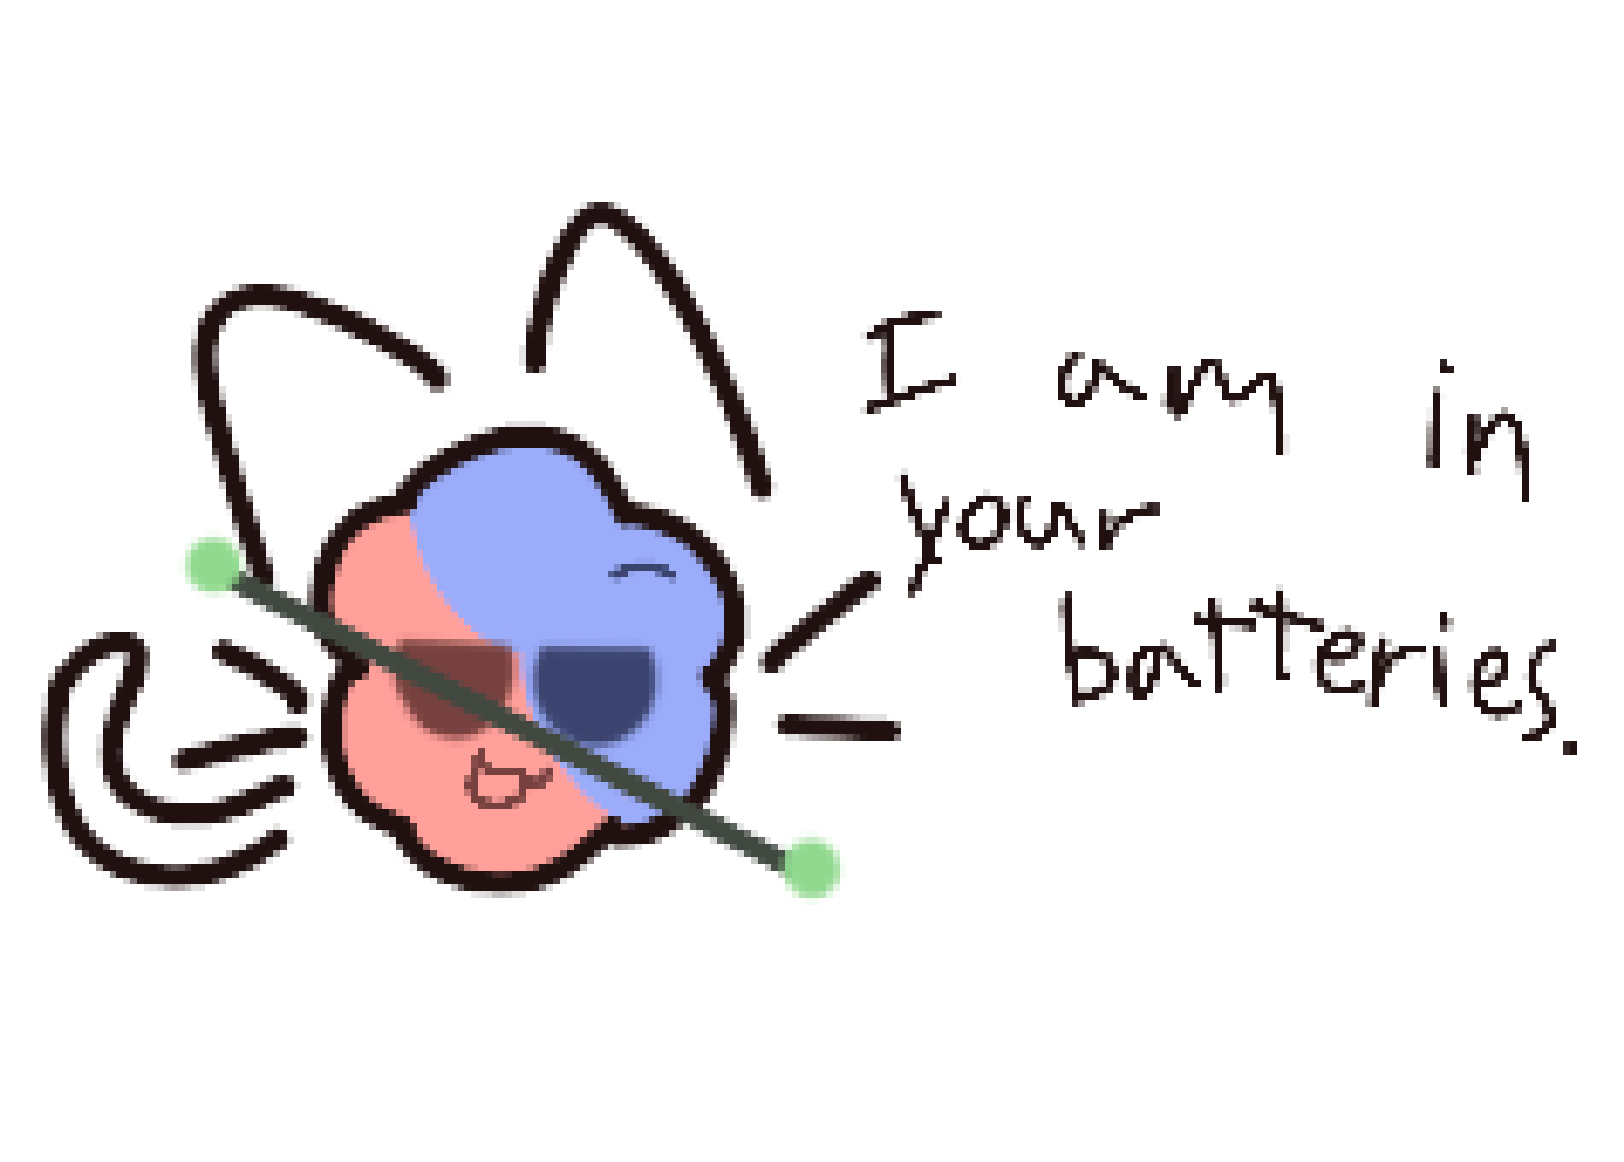 A Li+ atom looking at you. The atom has features of a cat. The cation is saying "I am in your batteries."